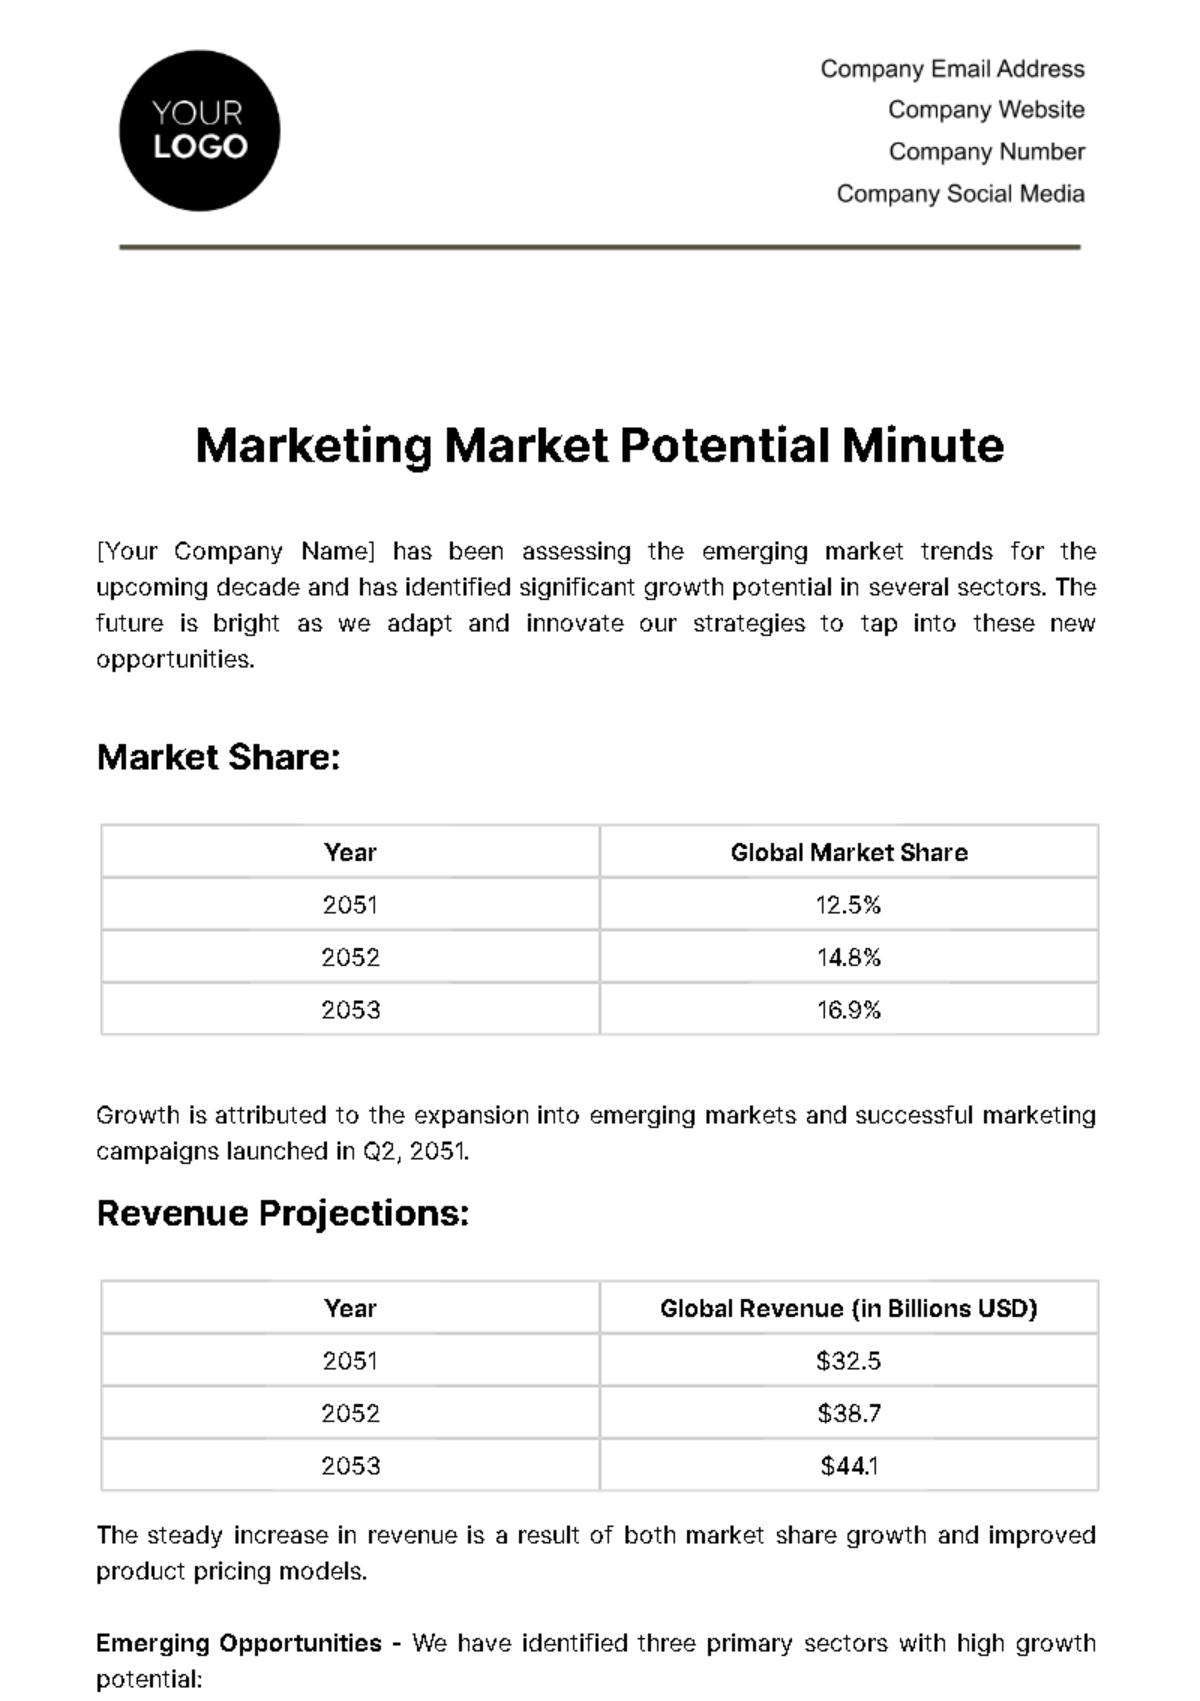 Marketing Market Potential Minute Template